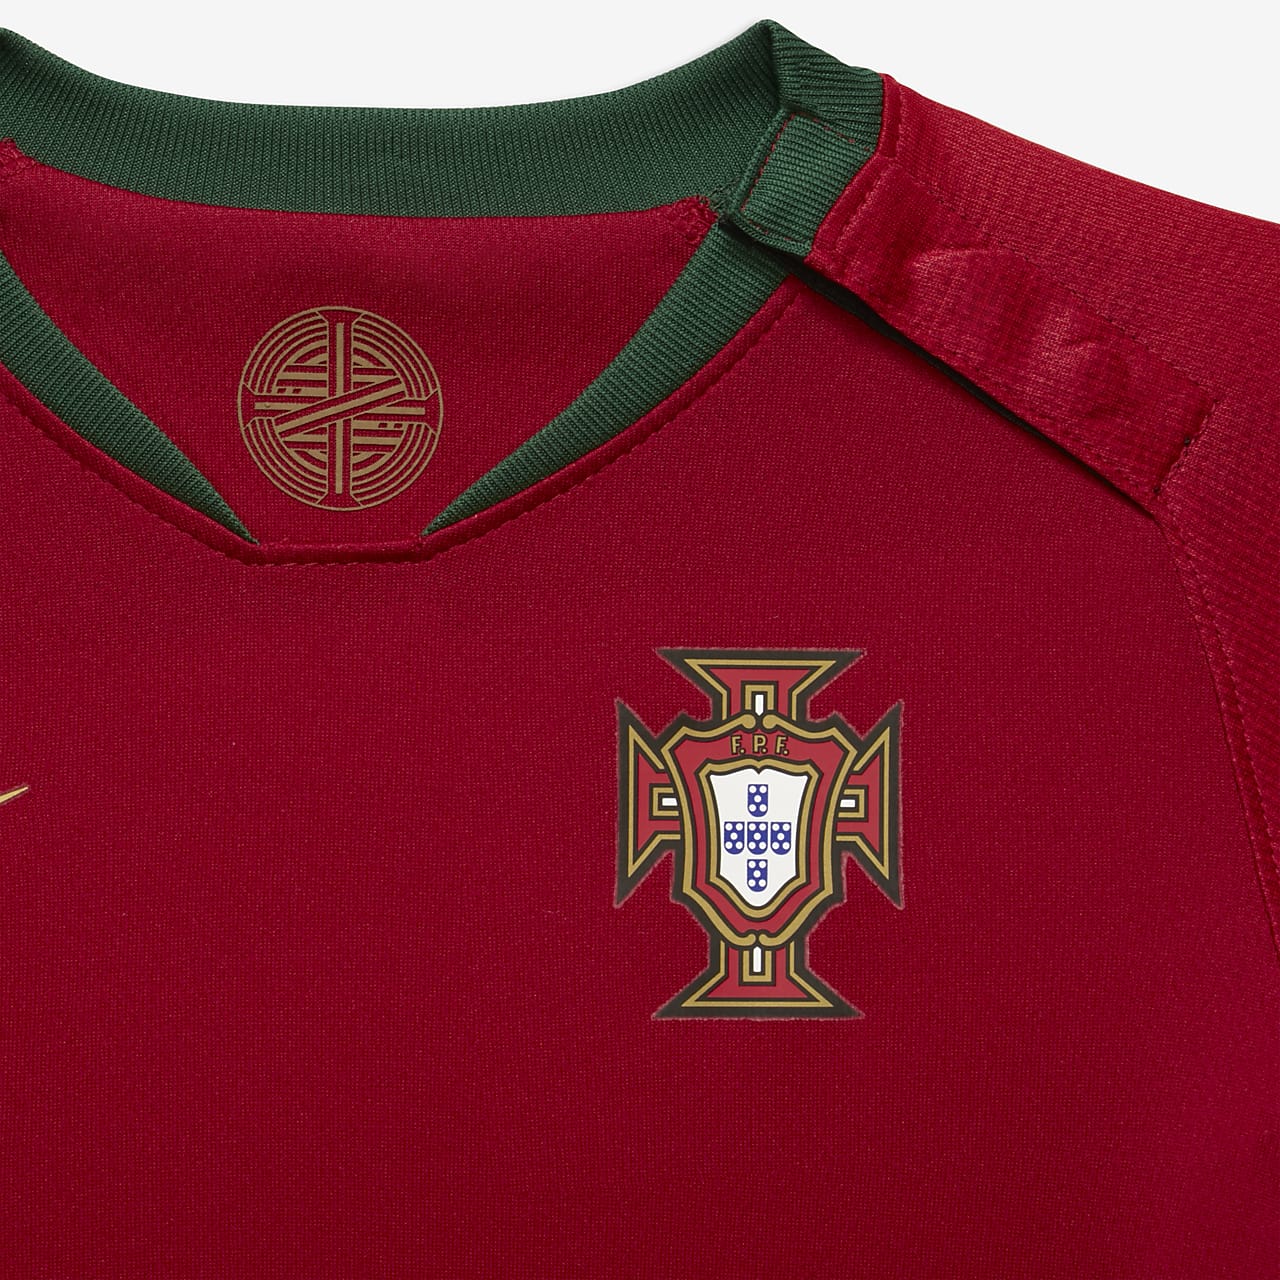 2018 portugal jersey